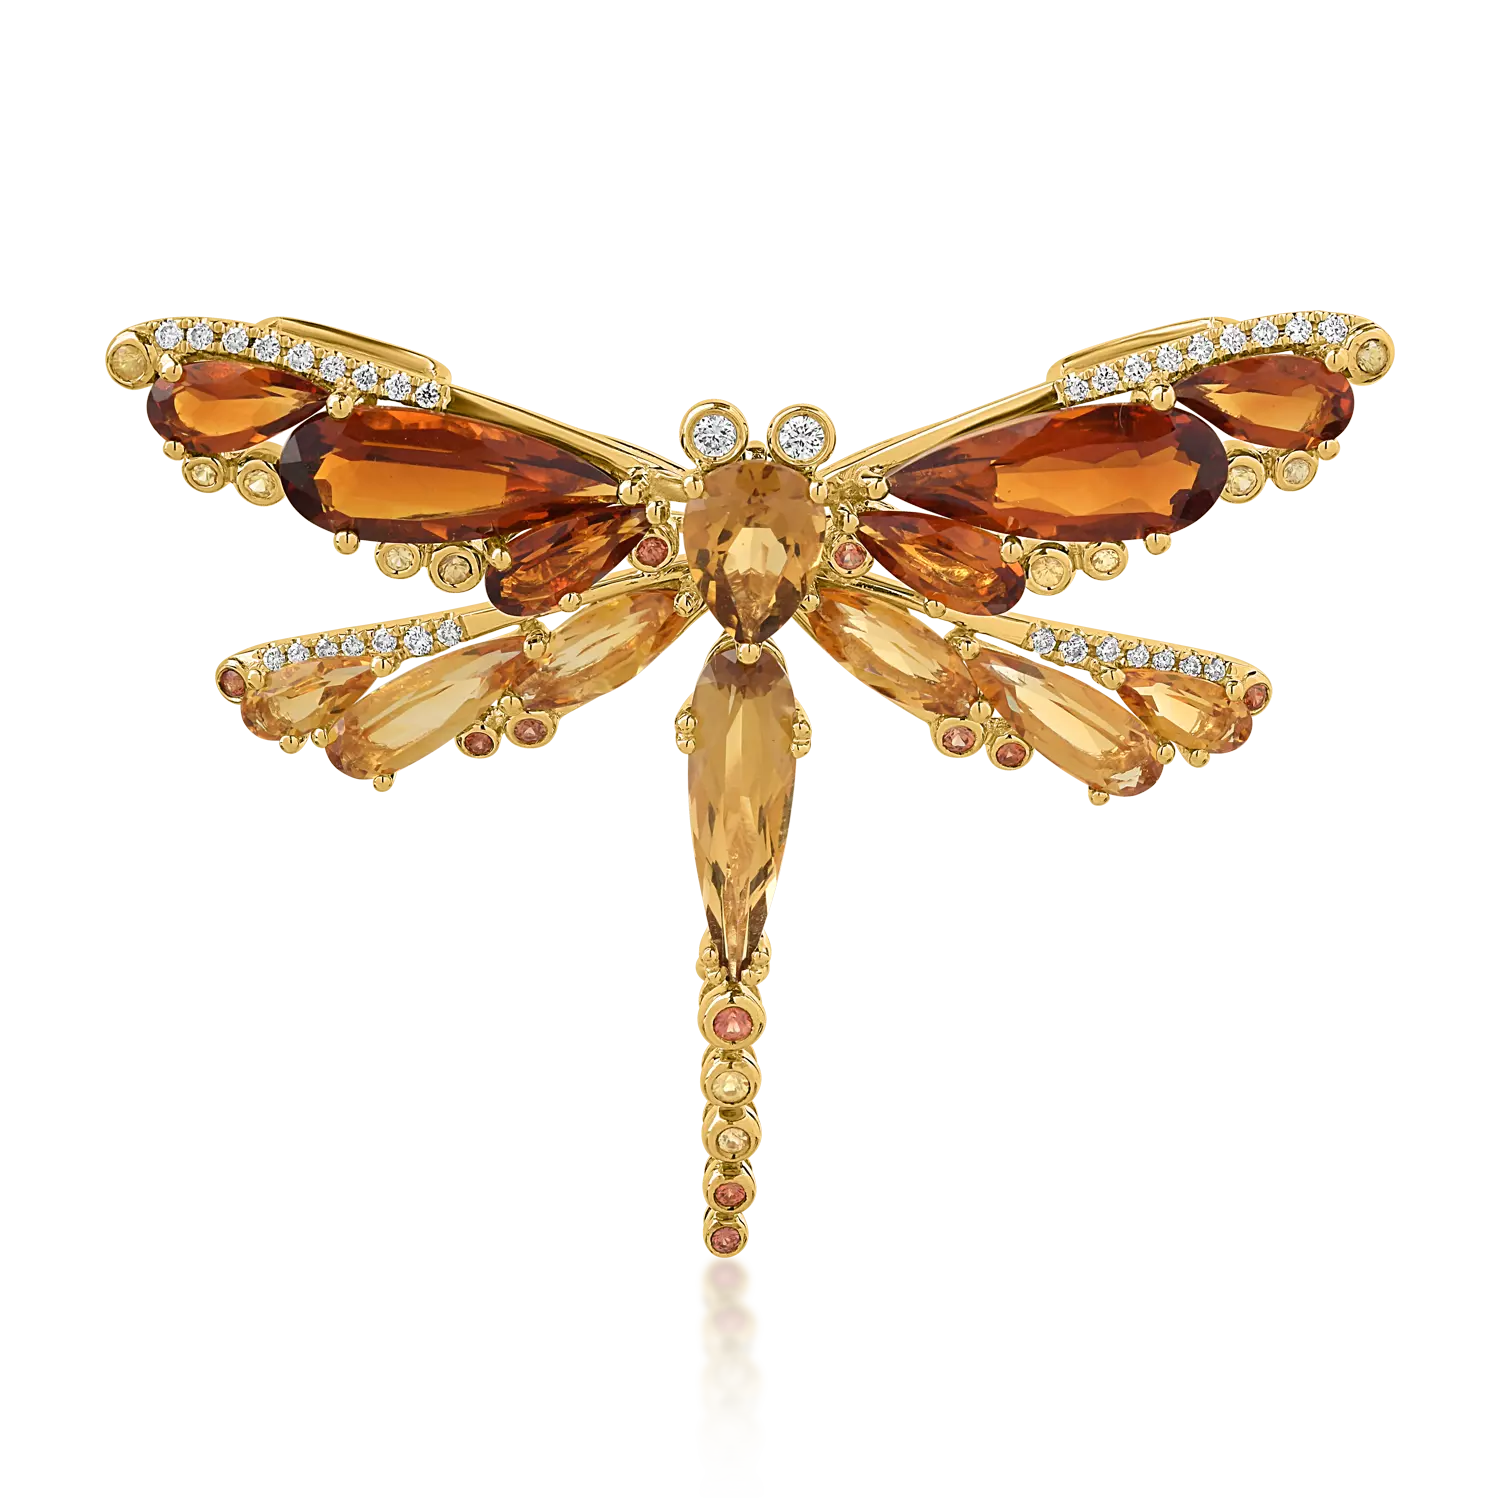 18K yellow gold dragonfly brooch with 11.21ct precious and semiprecious stones